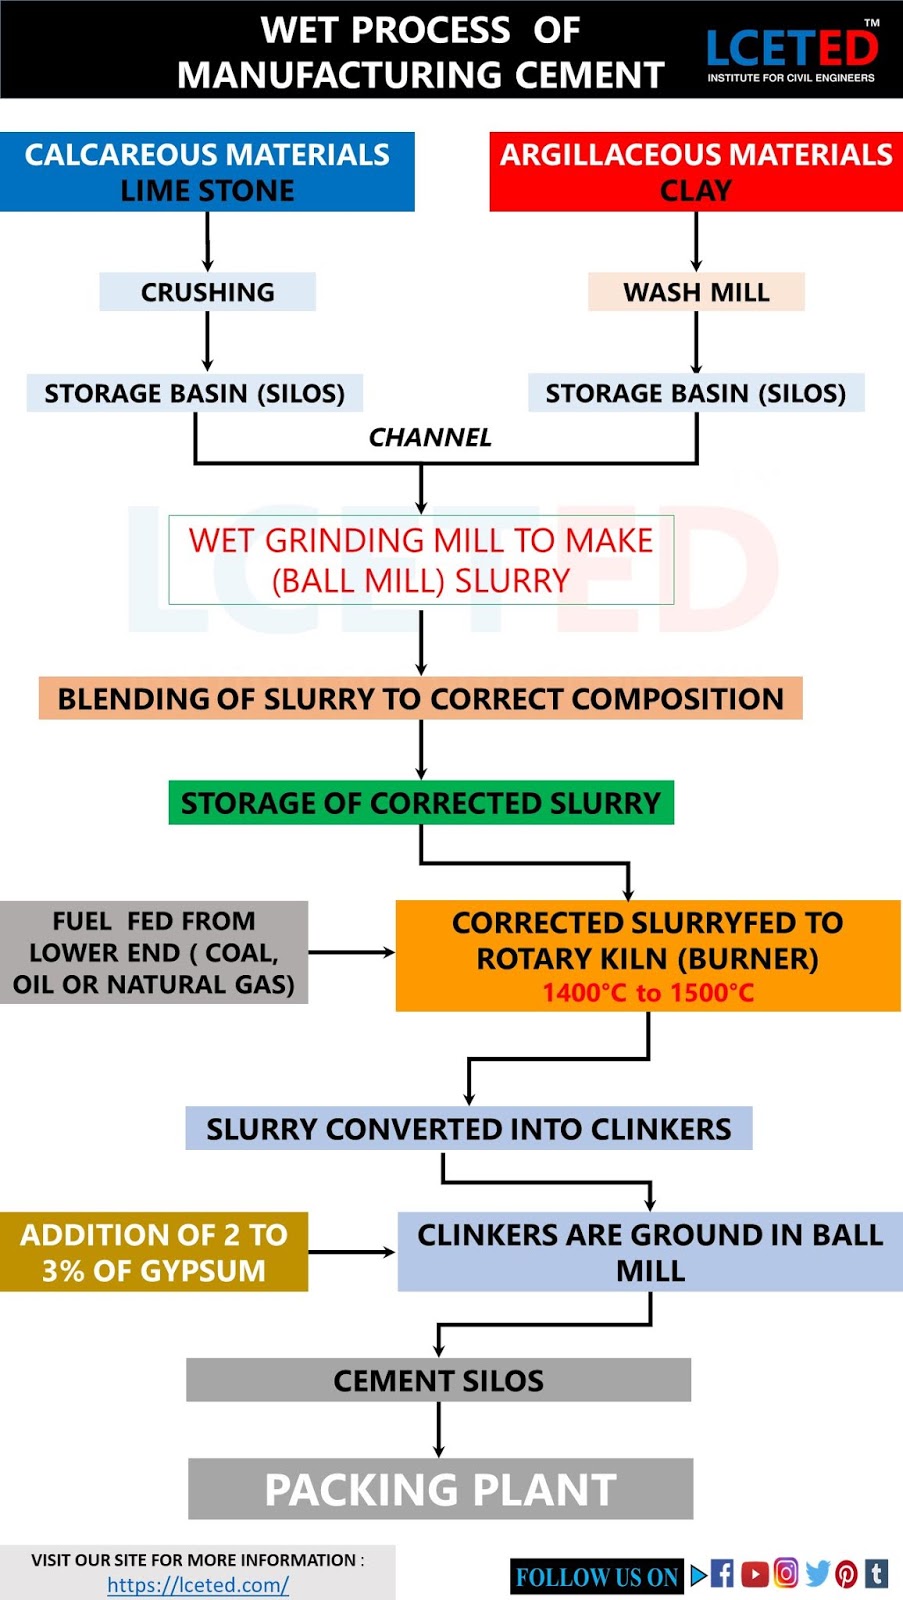 PROCESS OF CEMENT